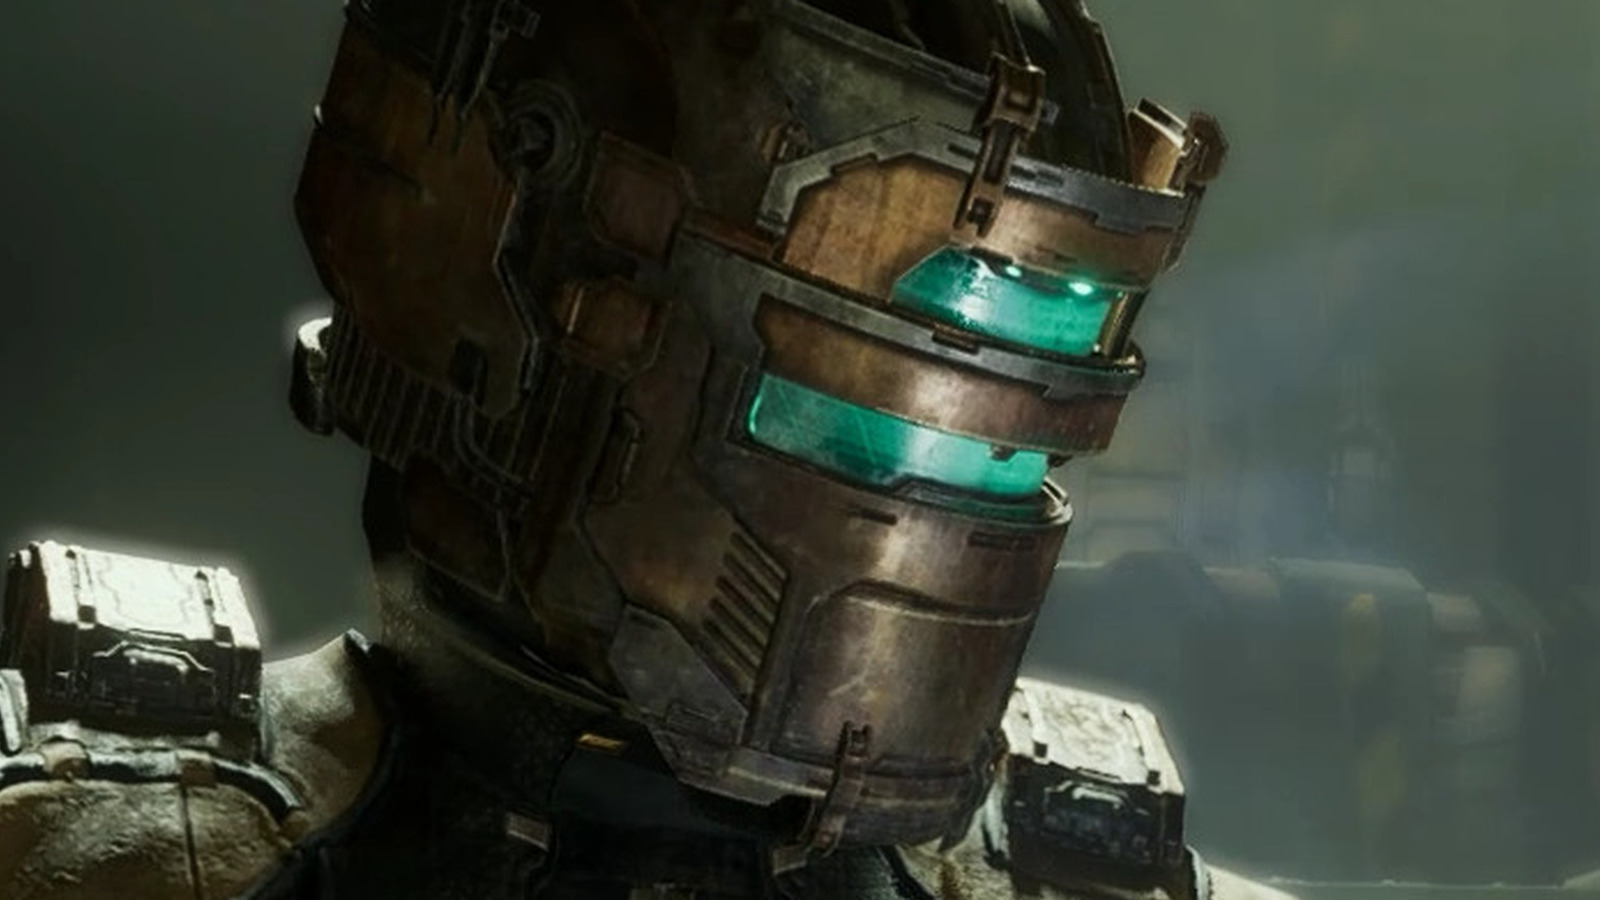 Dead Space 2' has left me emotionally brutalized. What horror videogame  scared you the most?